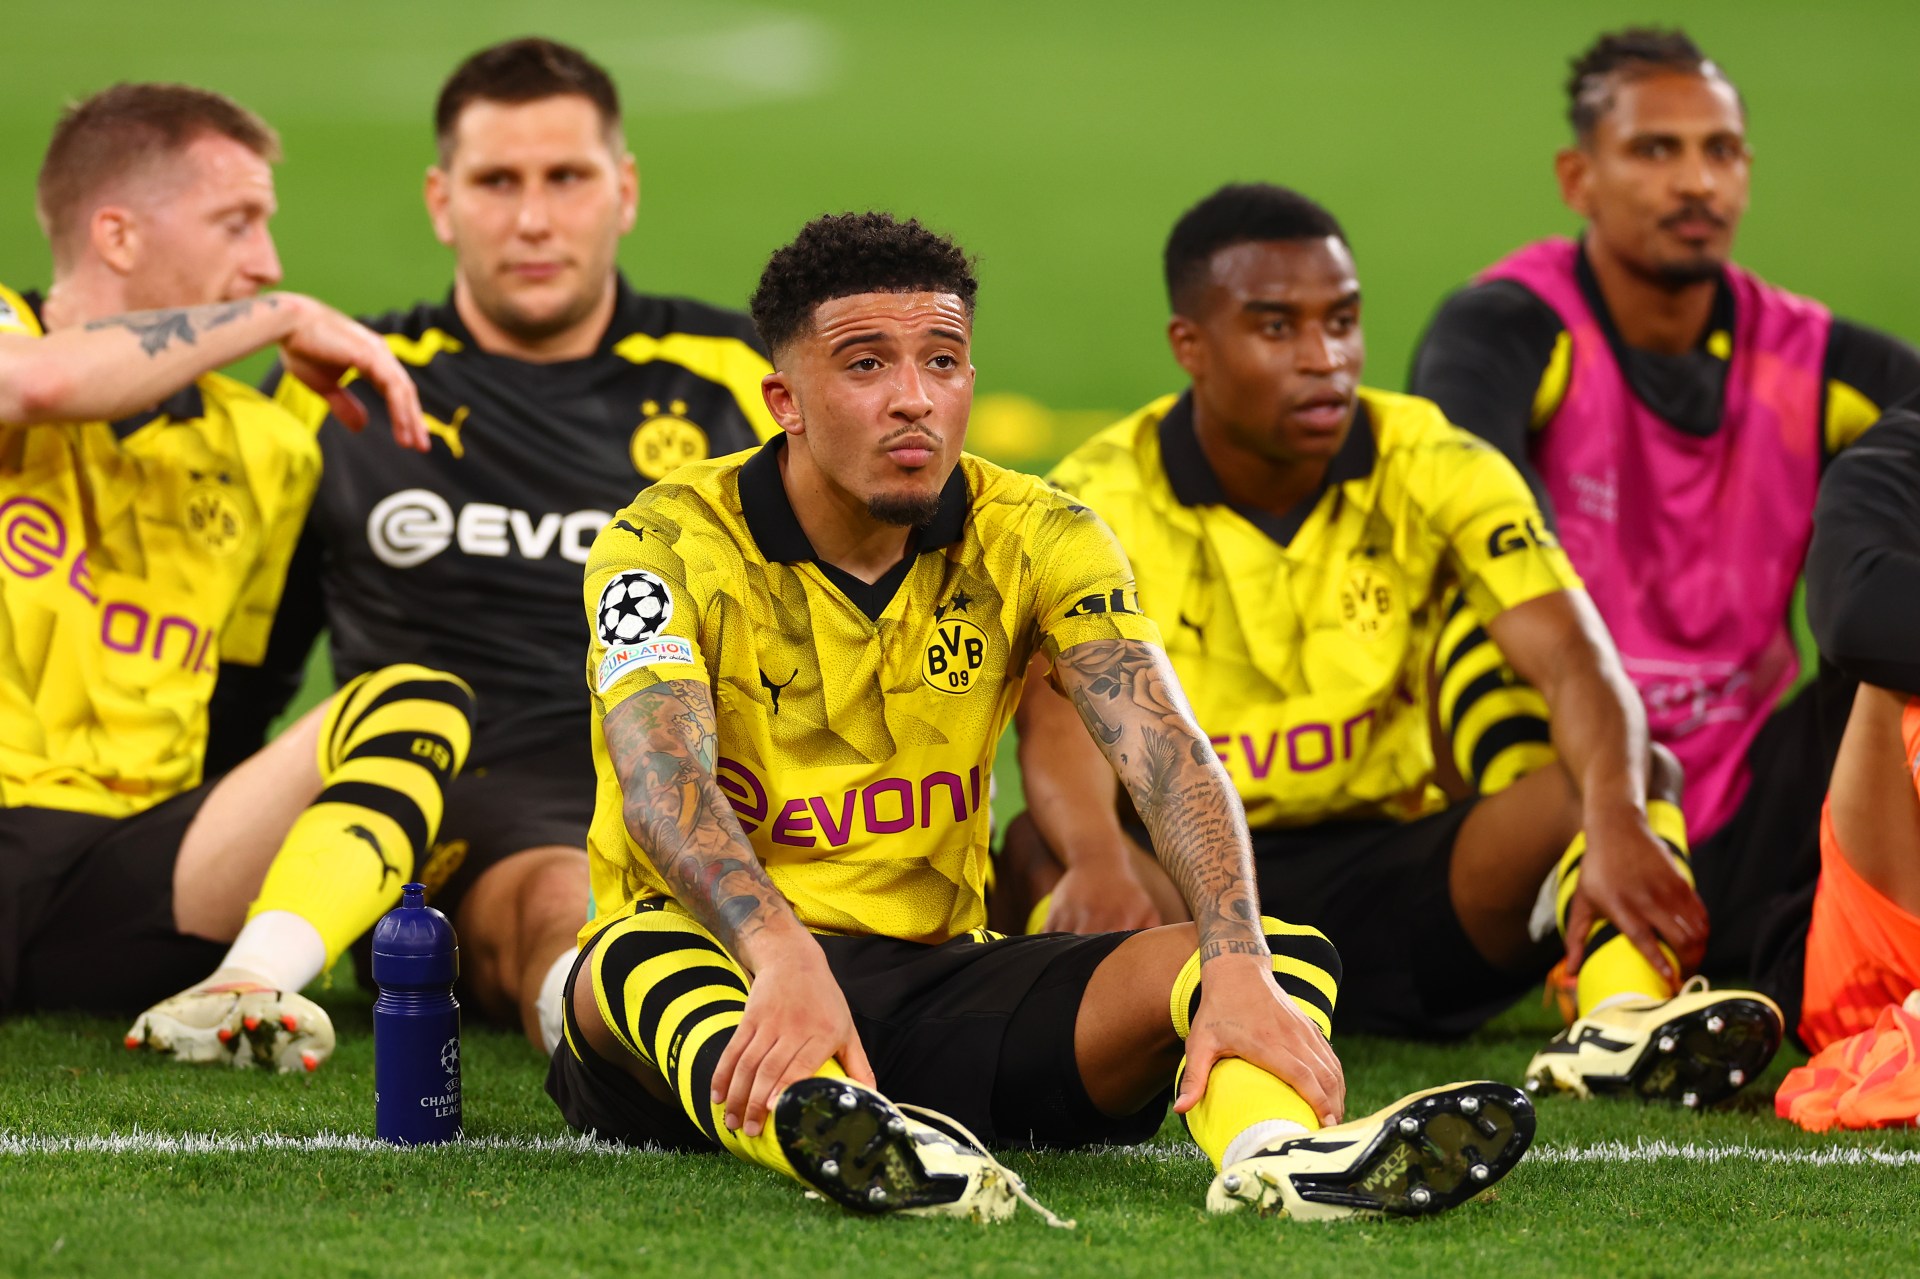 thierry henry sends touching message to jadon sancho after superb display vs psg